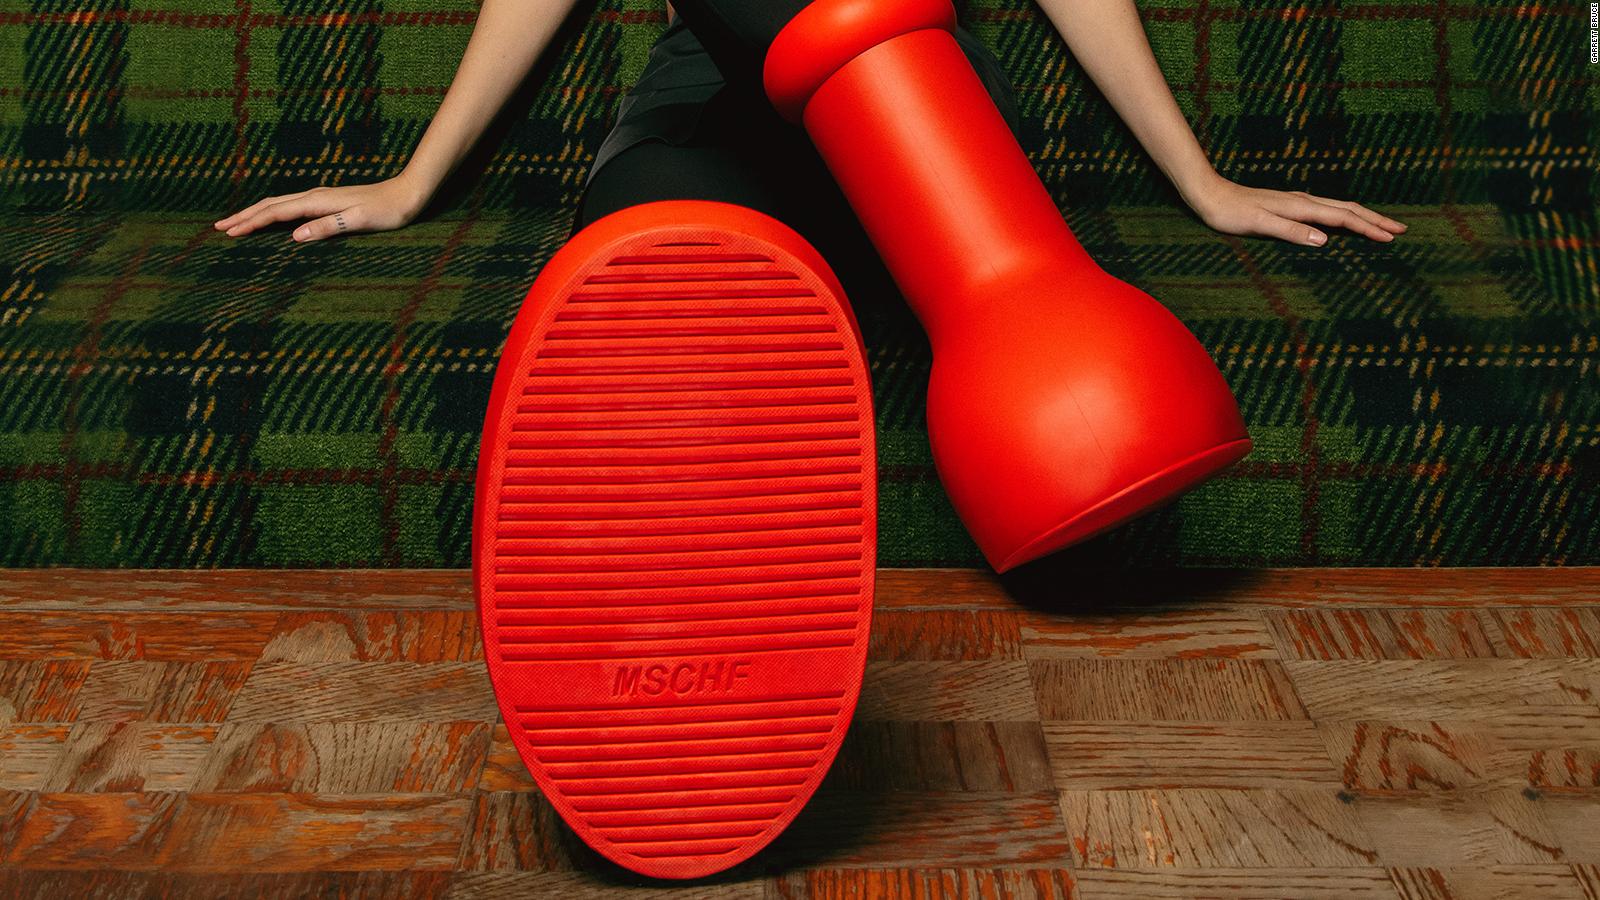 MSCHF Big Red Boots: With these absurd shoes, fashion is entering its silly  era - CNN Style